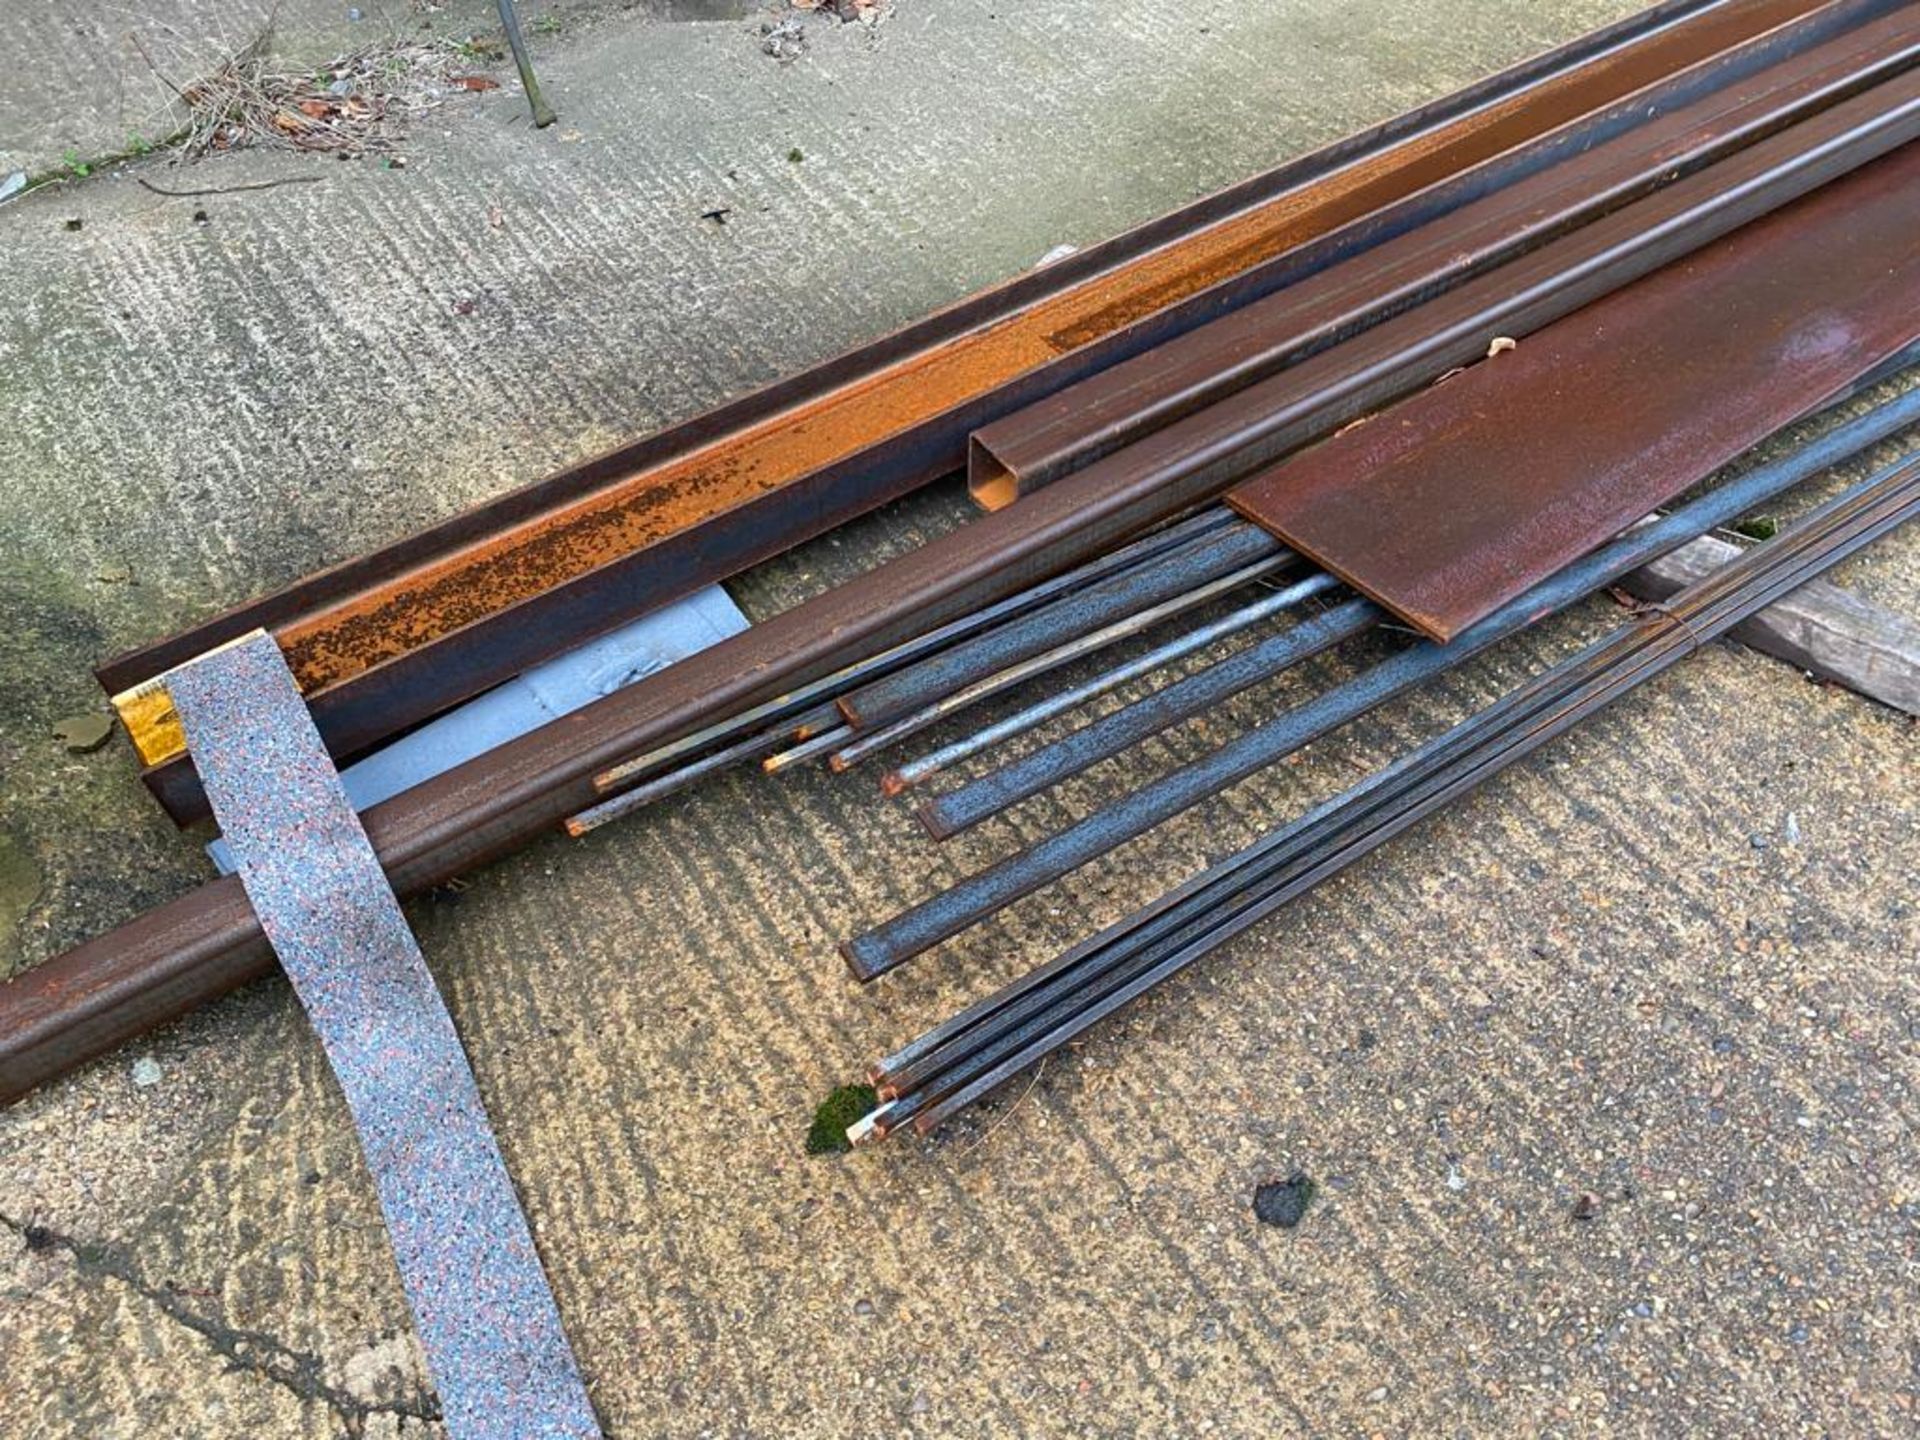 1 x Assorted Collection of Iron Strips, Rods, Plate and RSJ's - One RSJ Measures Over 12 Meters in - Image 3 of 4